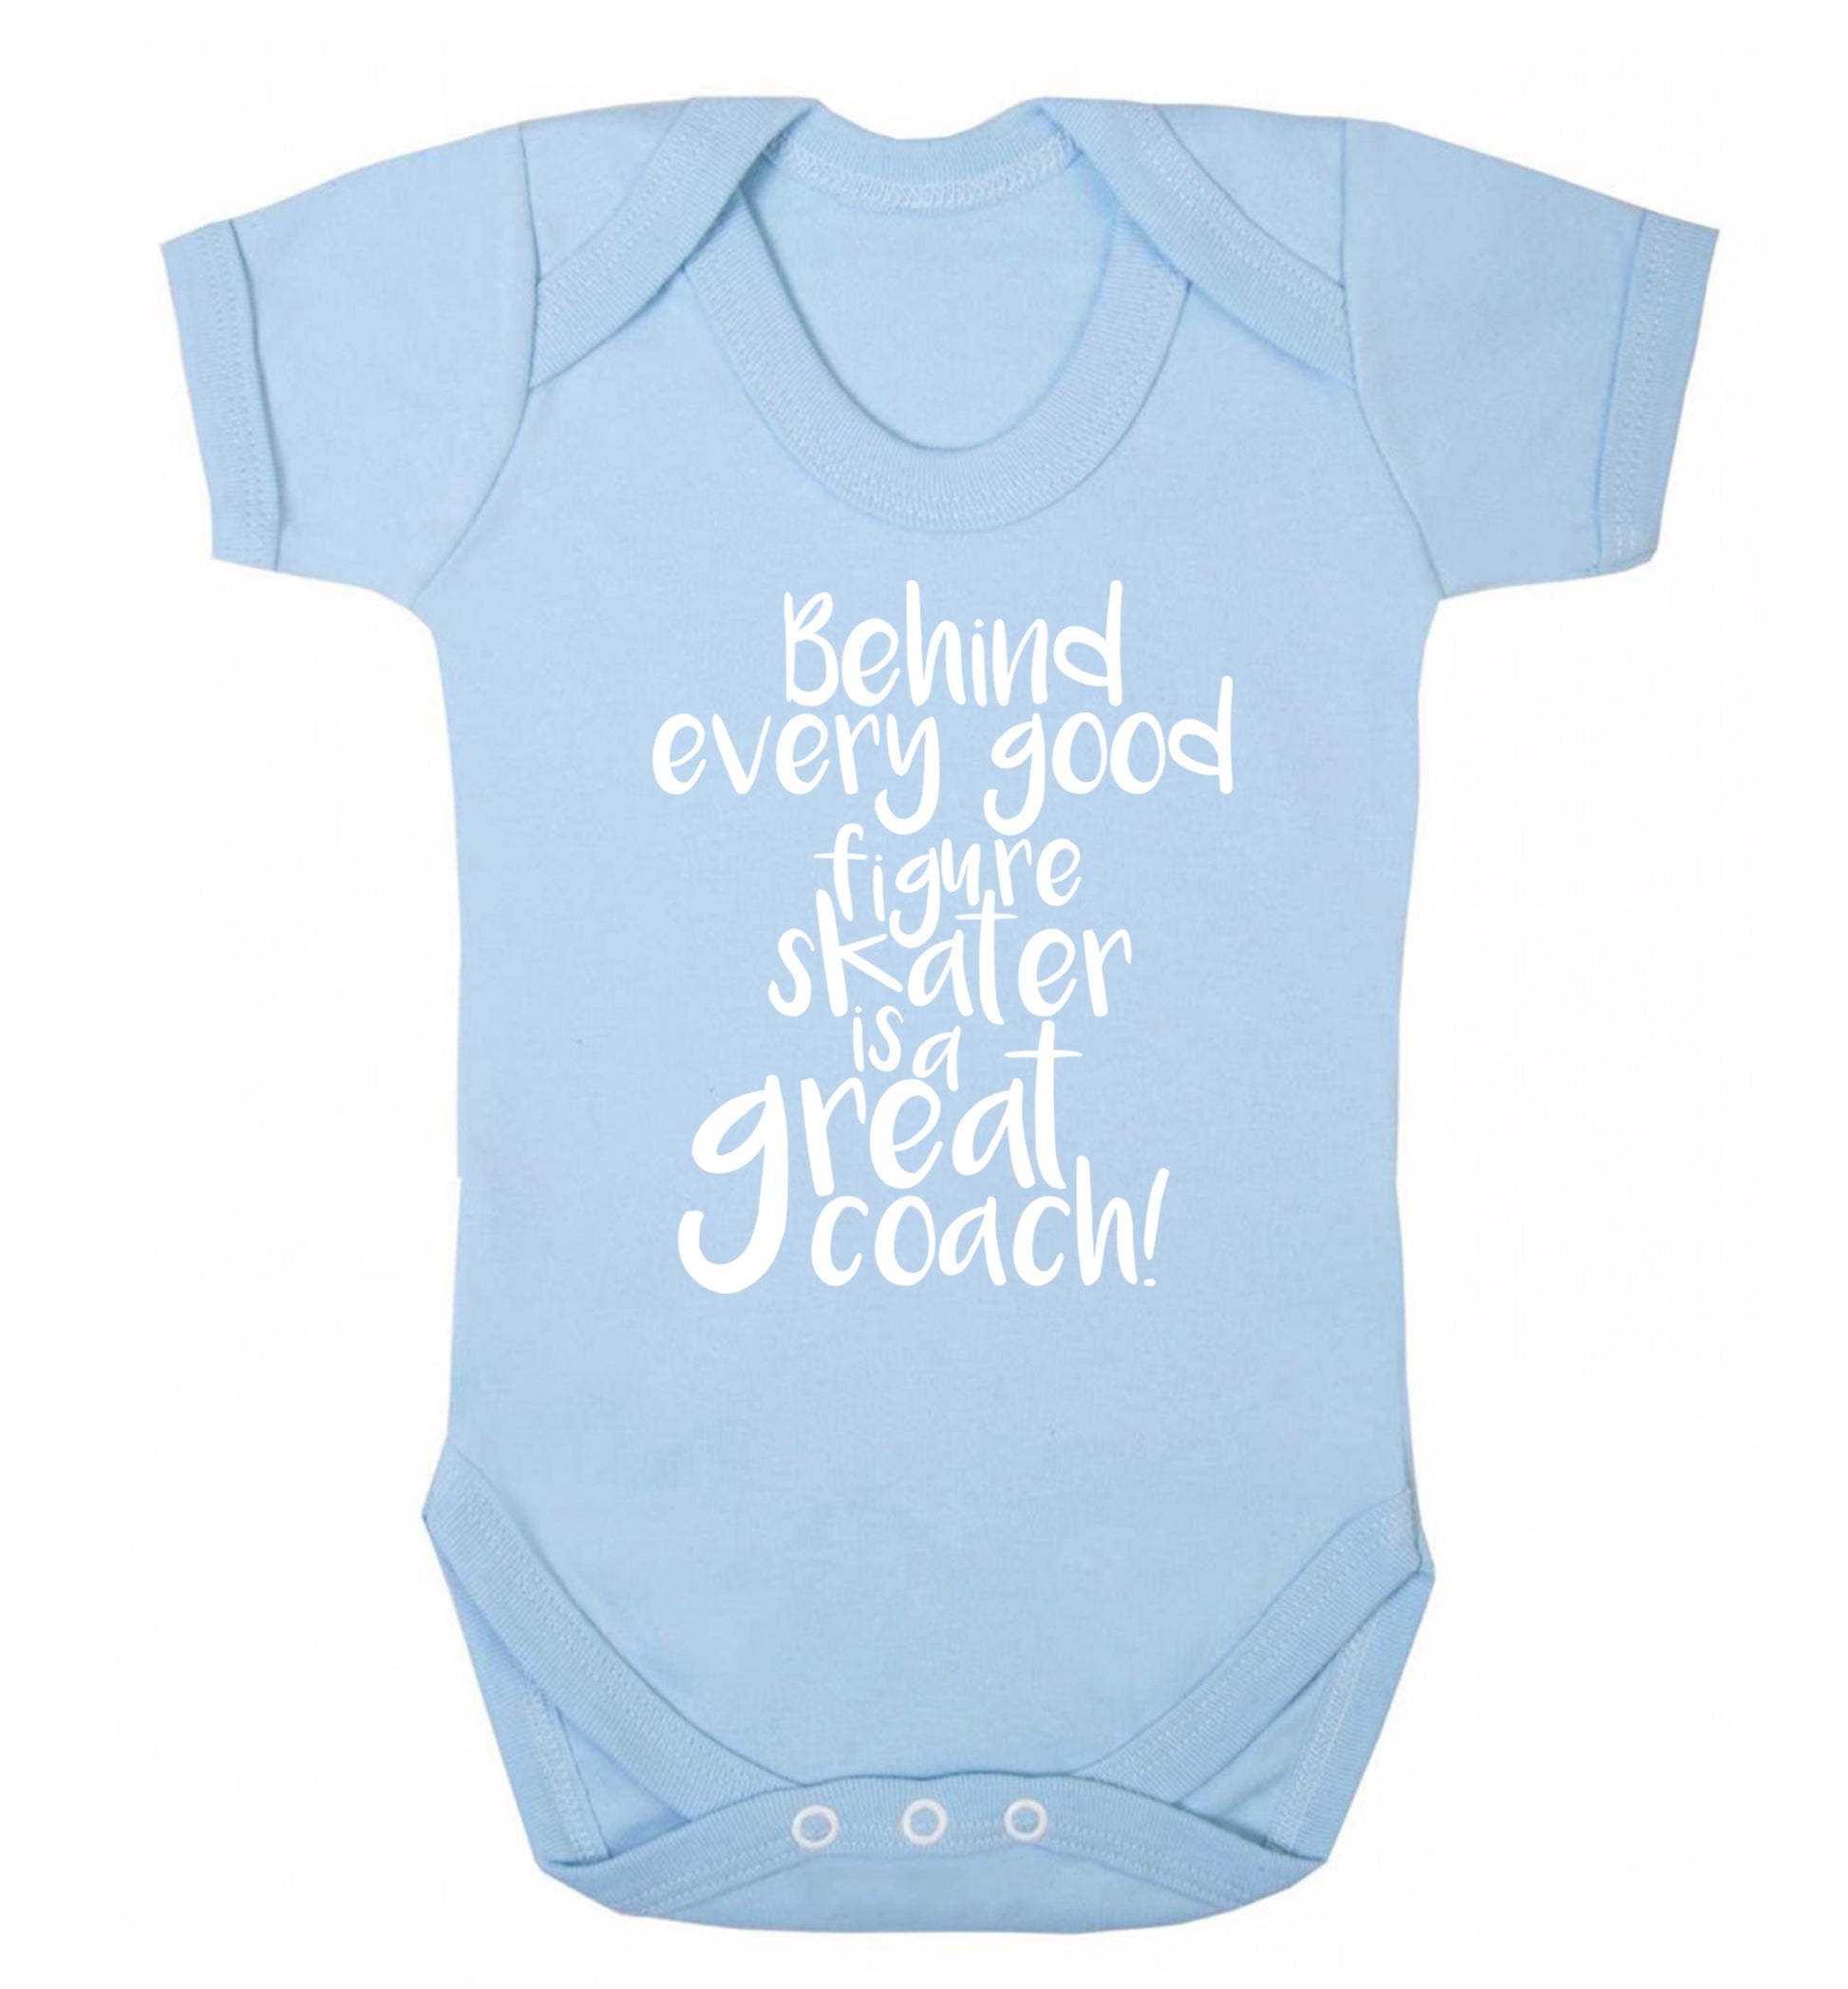 Behind every good figure skater is a great coach Baby Vest pale blue 18-24 months